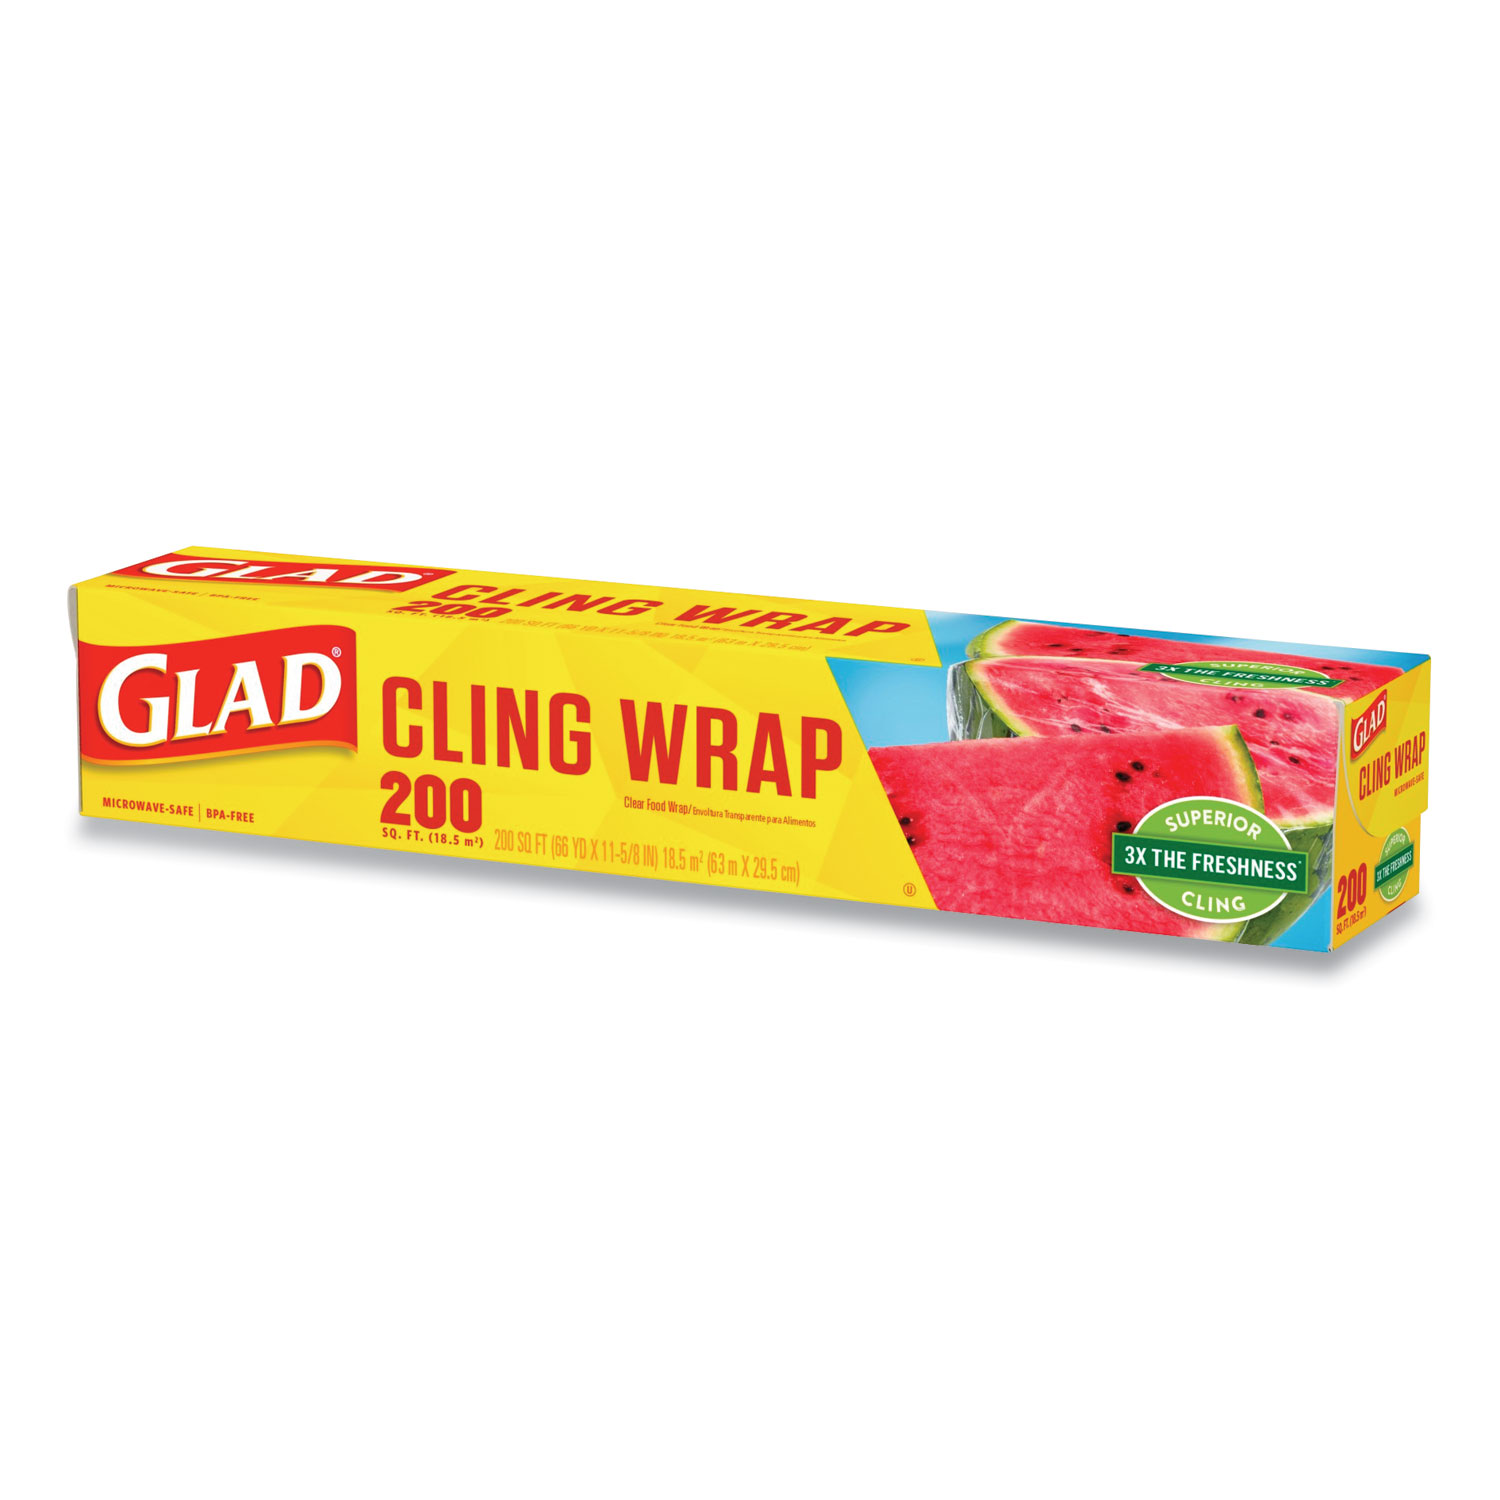 Glad Cling N Seal Plastic Food Wrap, 300 Square Foot Roll - 4 Pack (Package  May Vary)